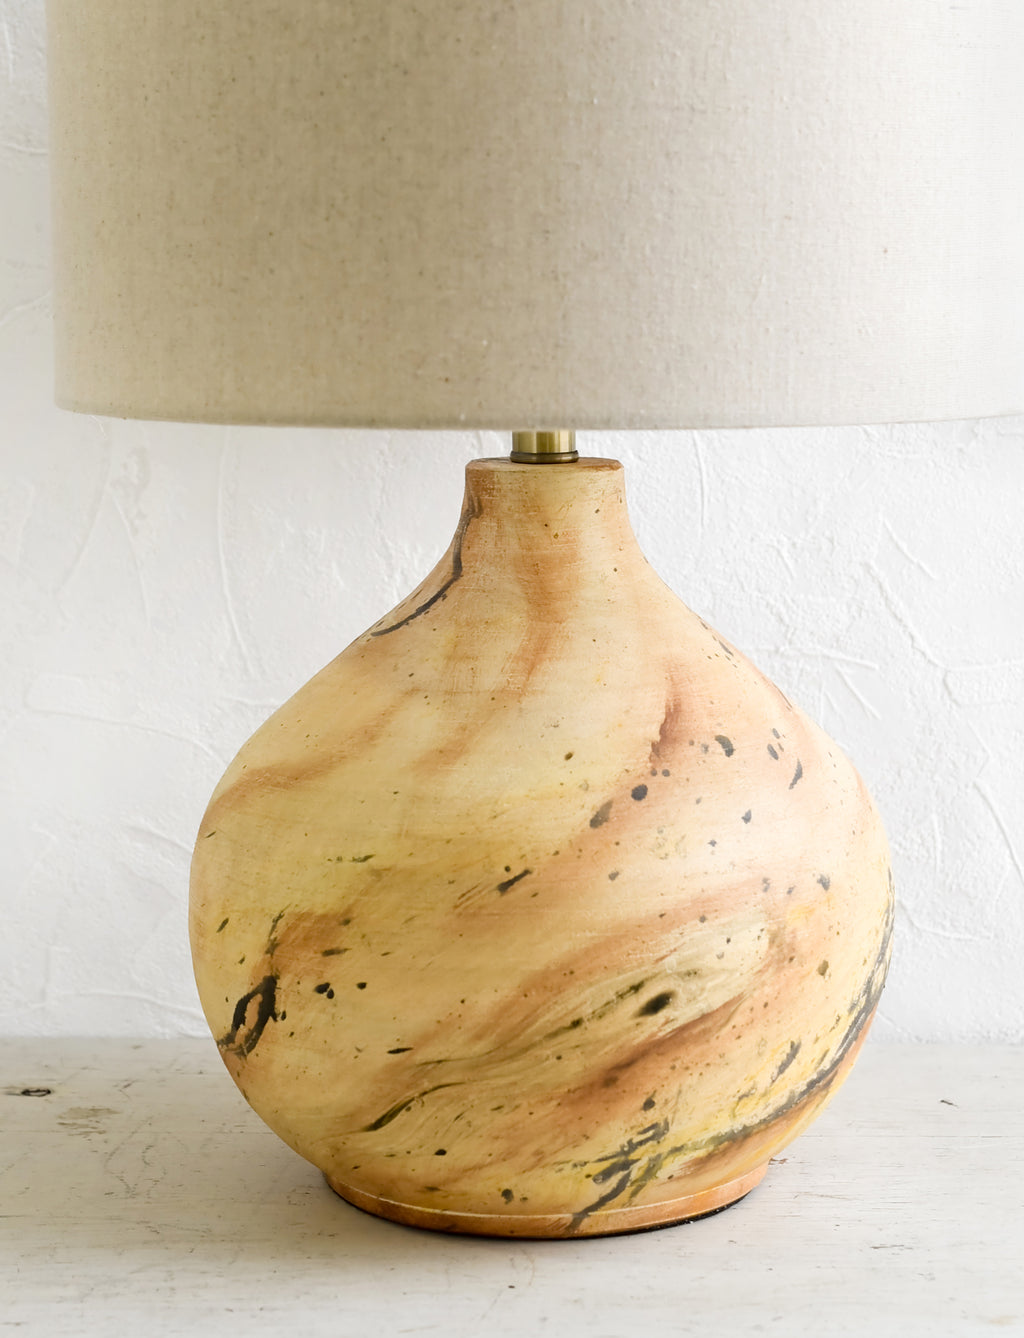 2: A table lamp with round ceramic base with paint splatter effect and round natural linen shade.